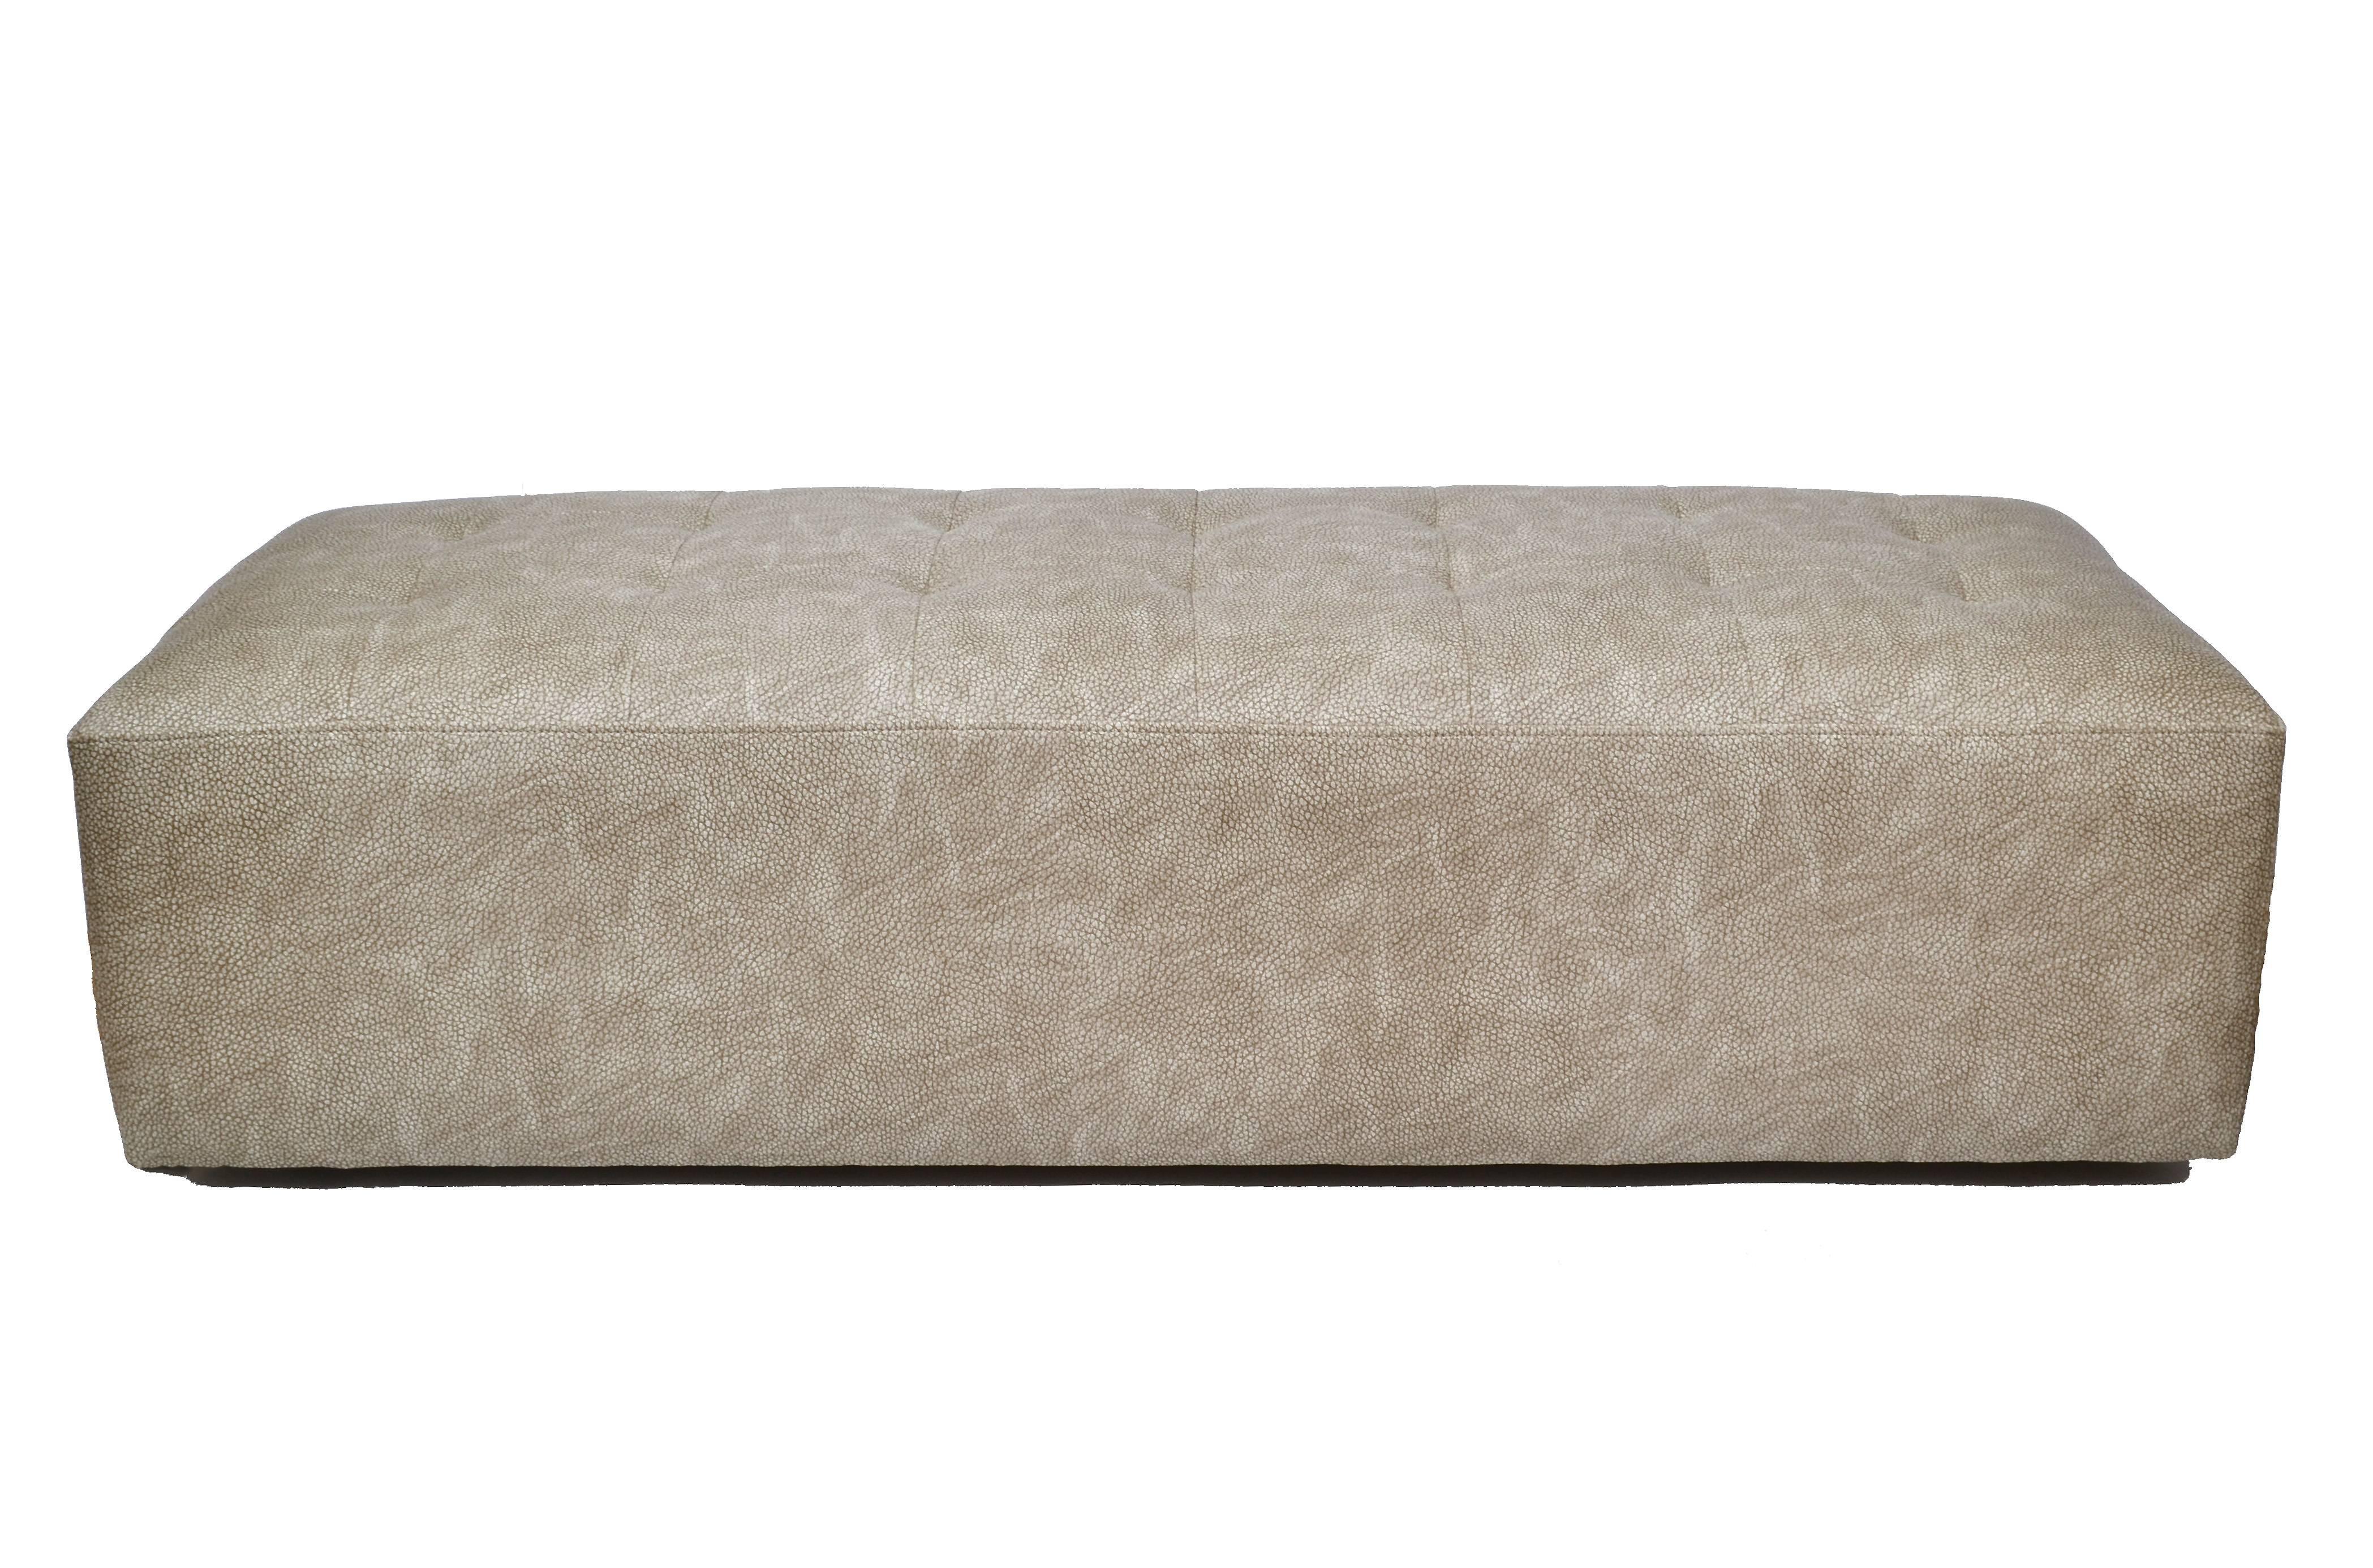 Modern faux shagreen leather bench on casters.
Ideal for children or in front of a bed.

        